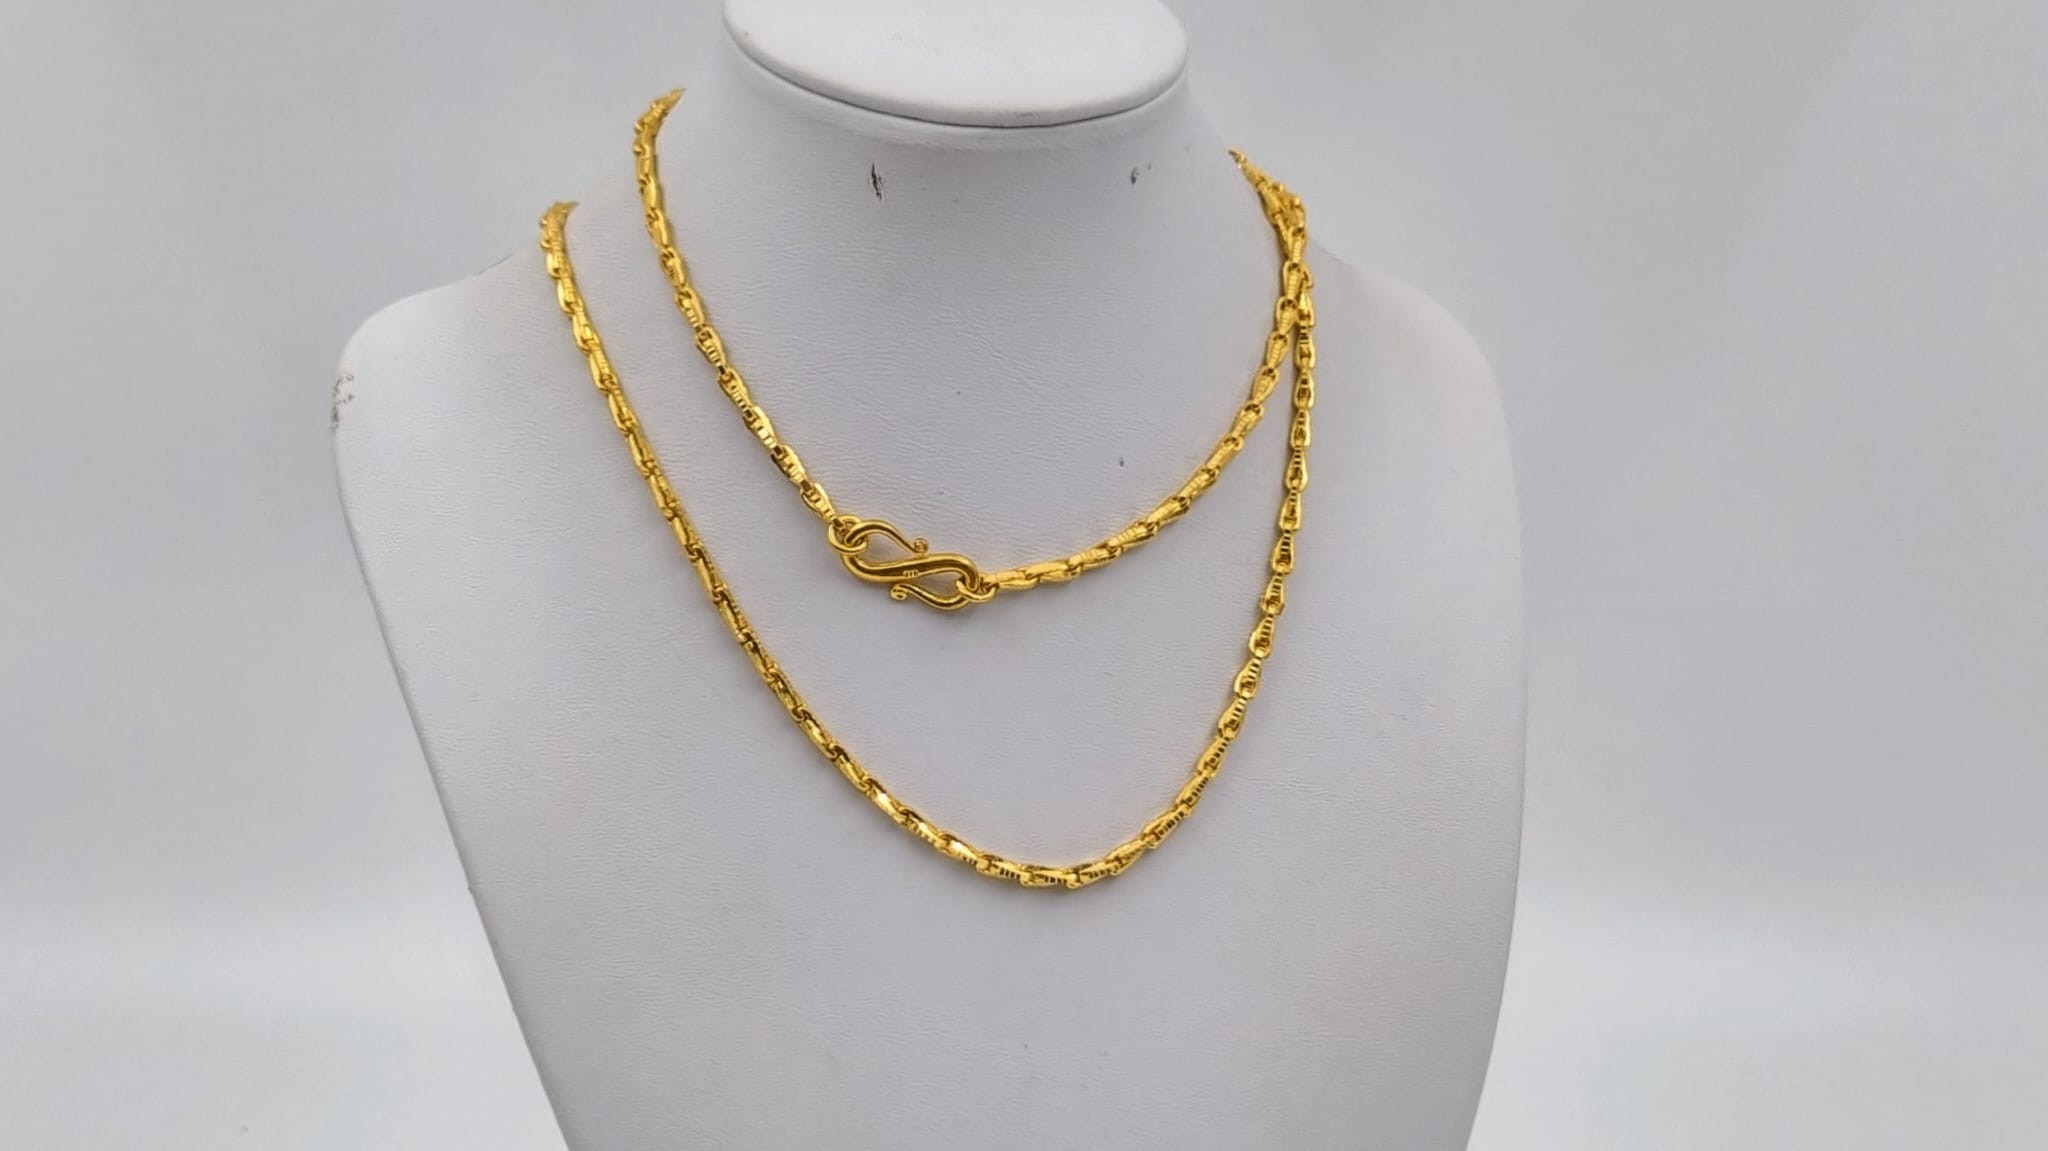 A 22k Yellow Gold Teardrop-Link Chain with S Clasp. 70cm. 53.9g - Image 4 of 4